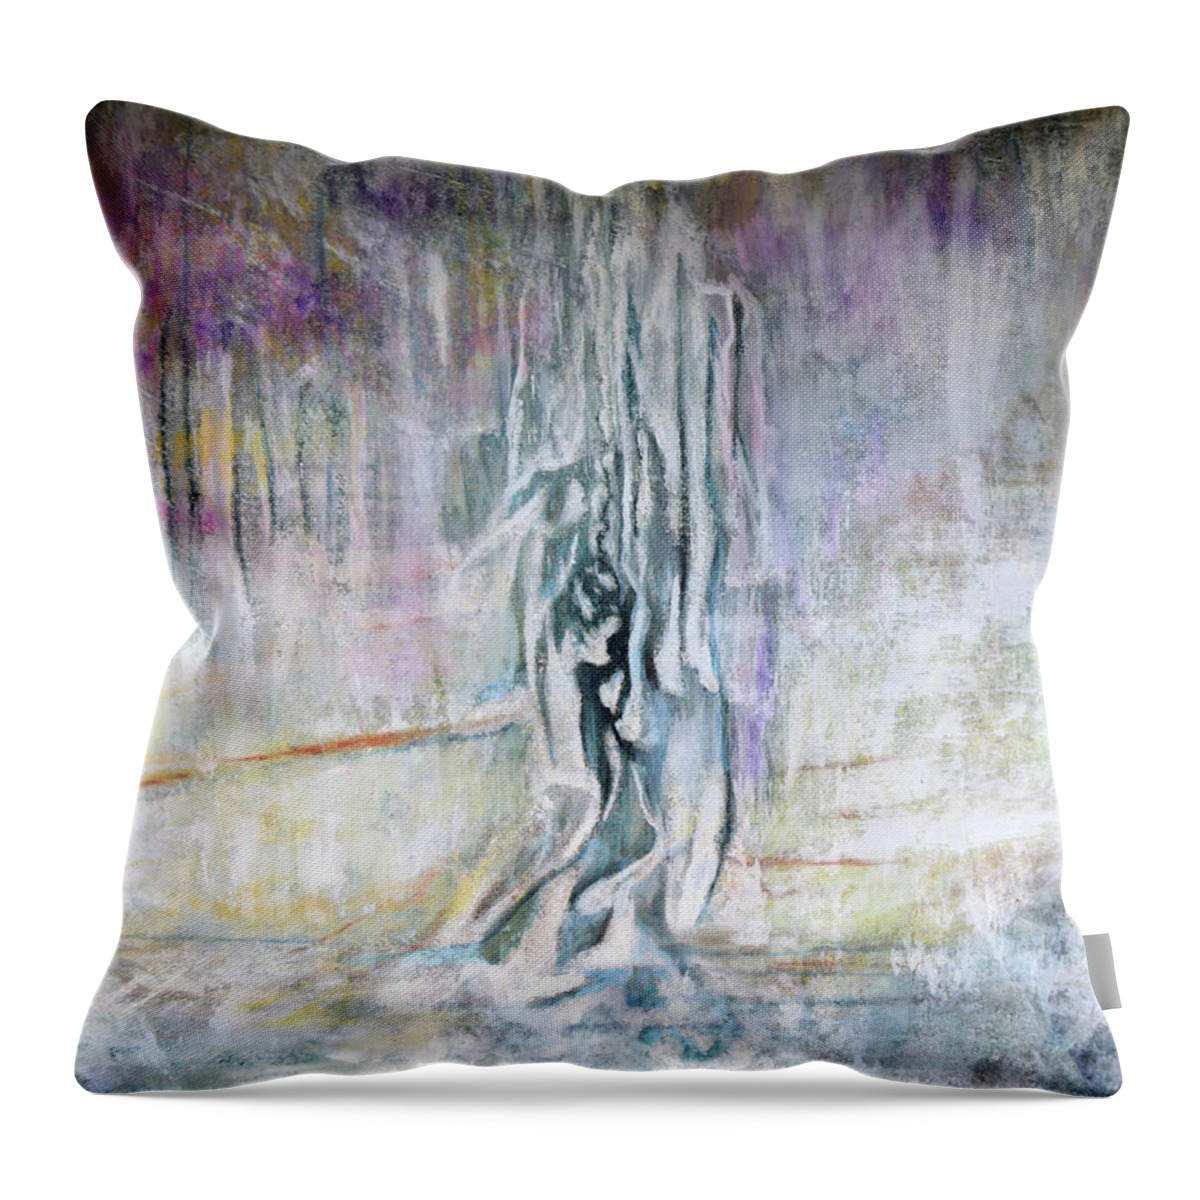 Abstract Throw Pillow featuring the painting Iluminated Illusions by Toni Willey